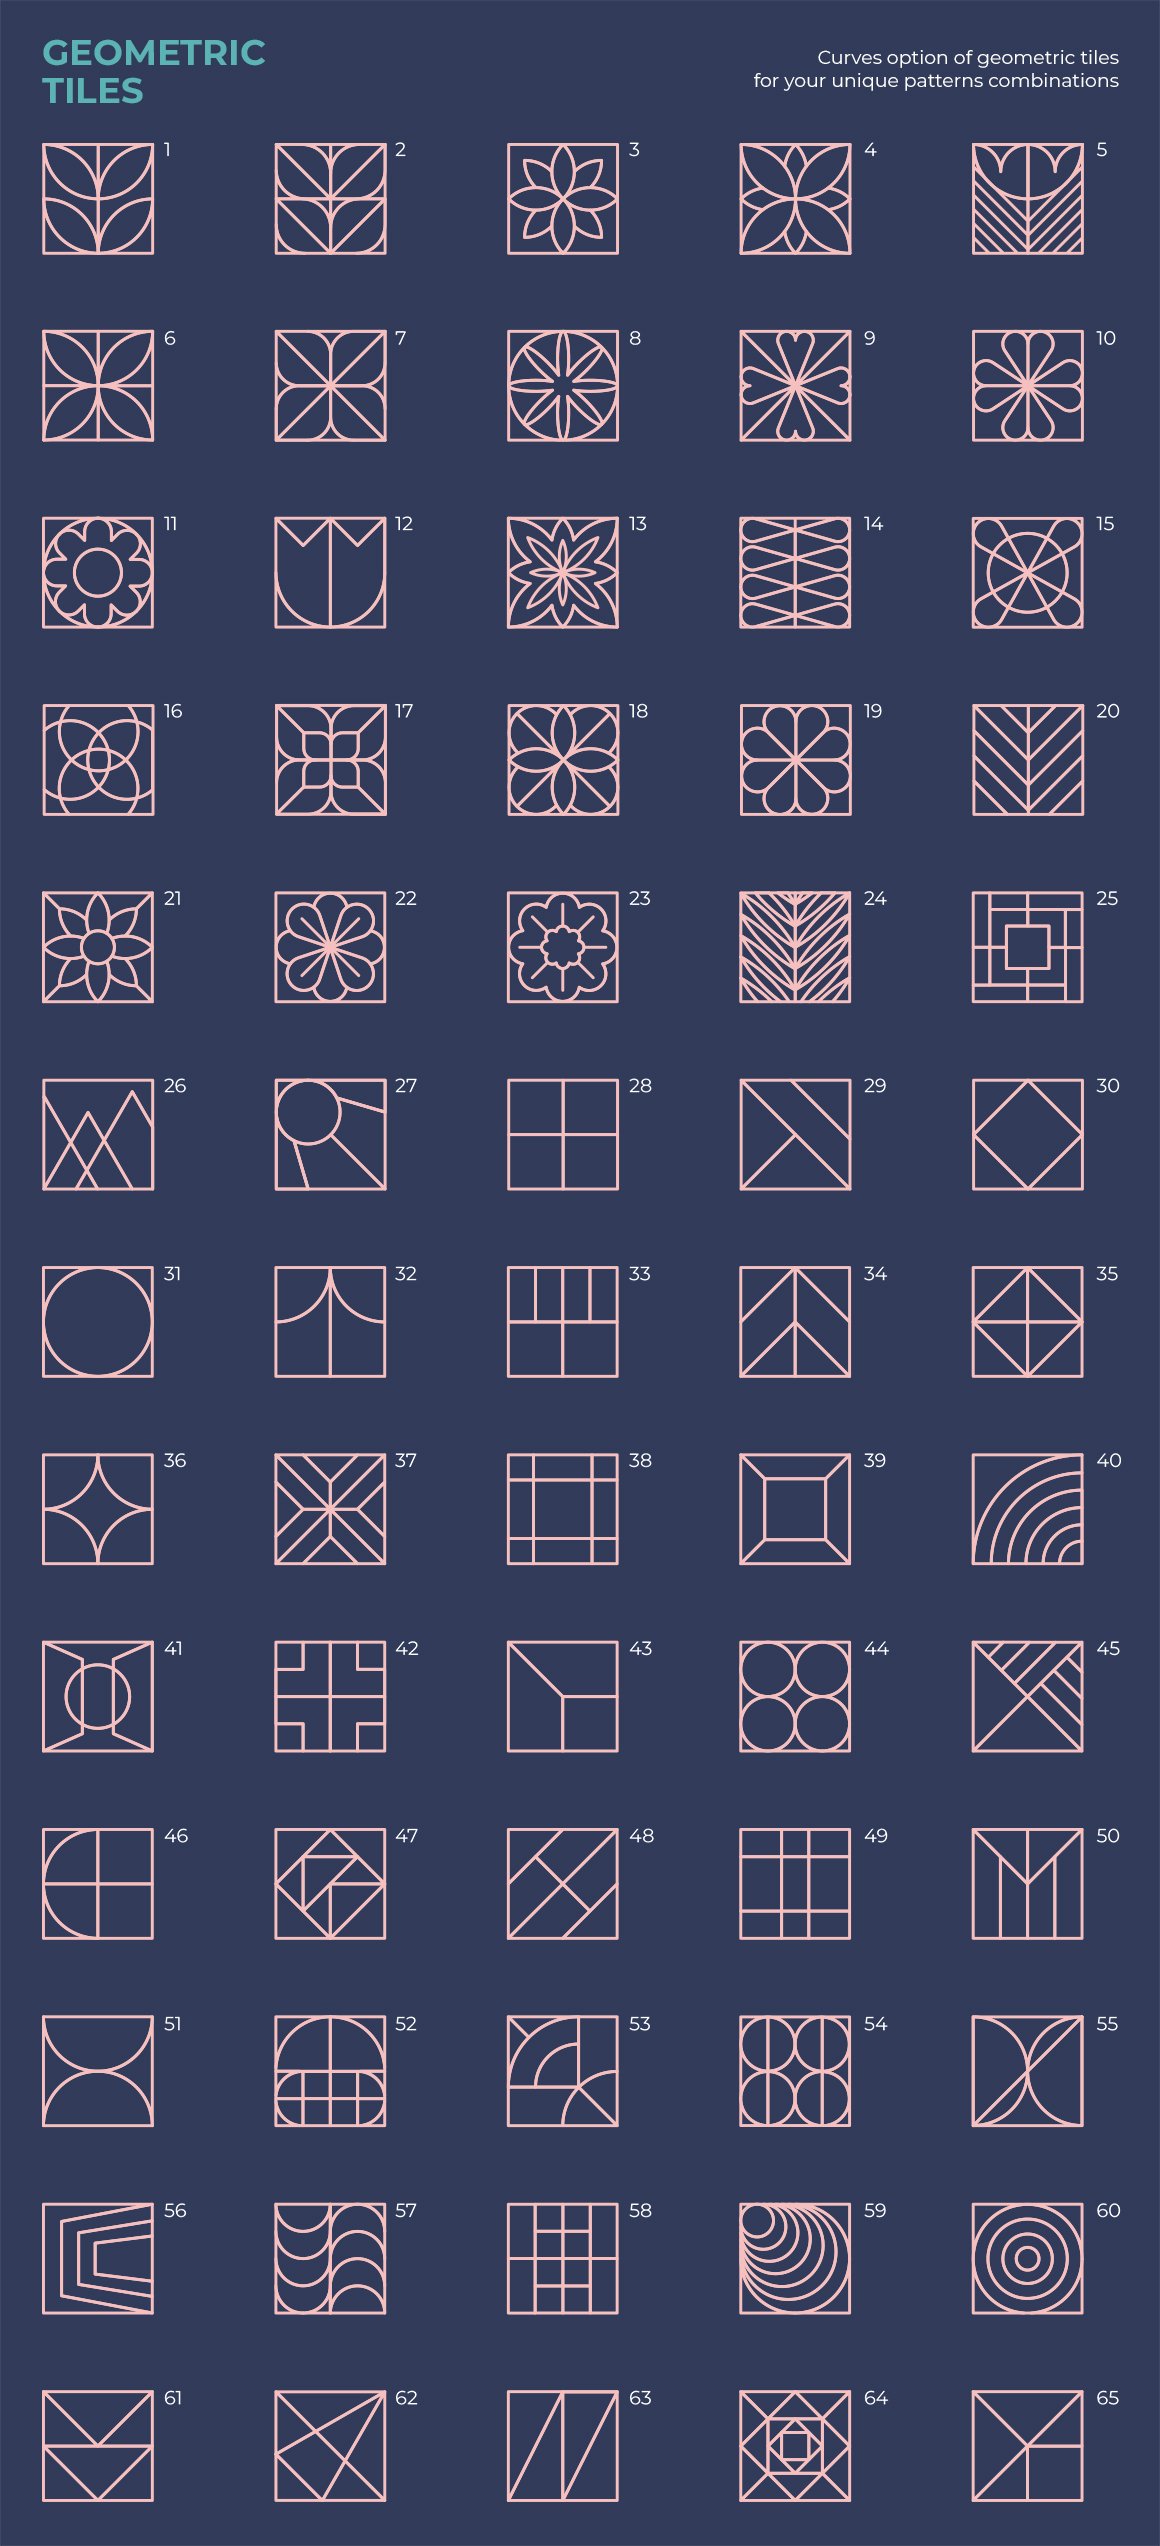 Customised Graphics Square Patterns